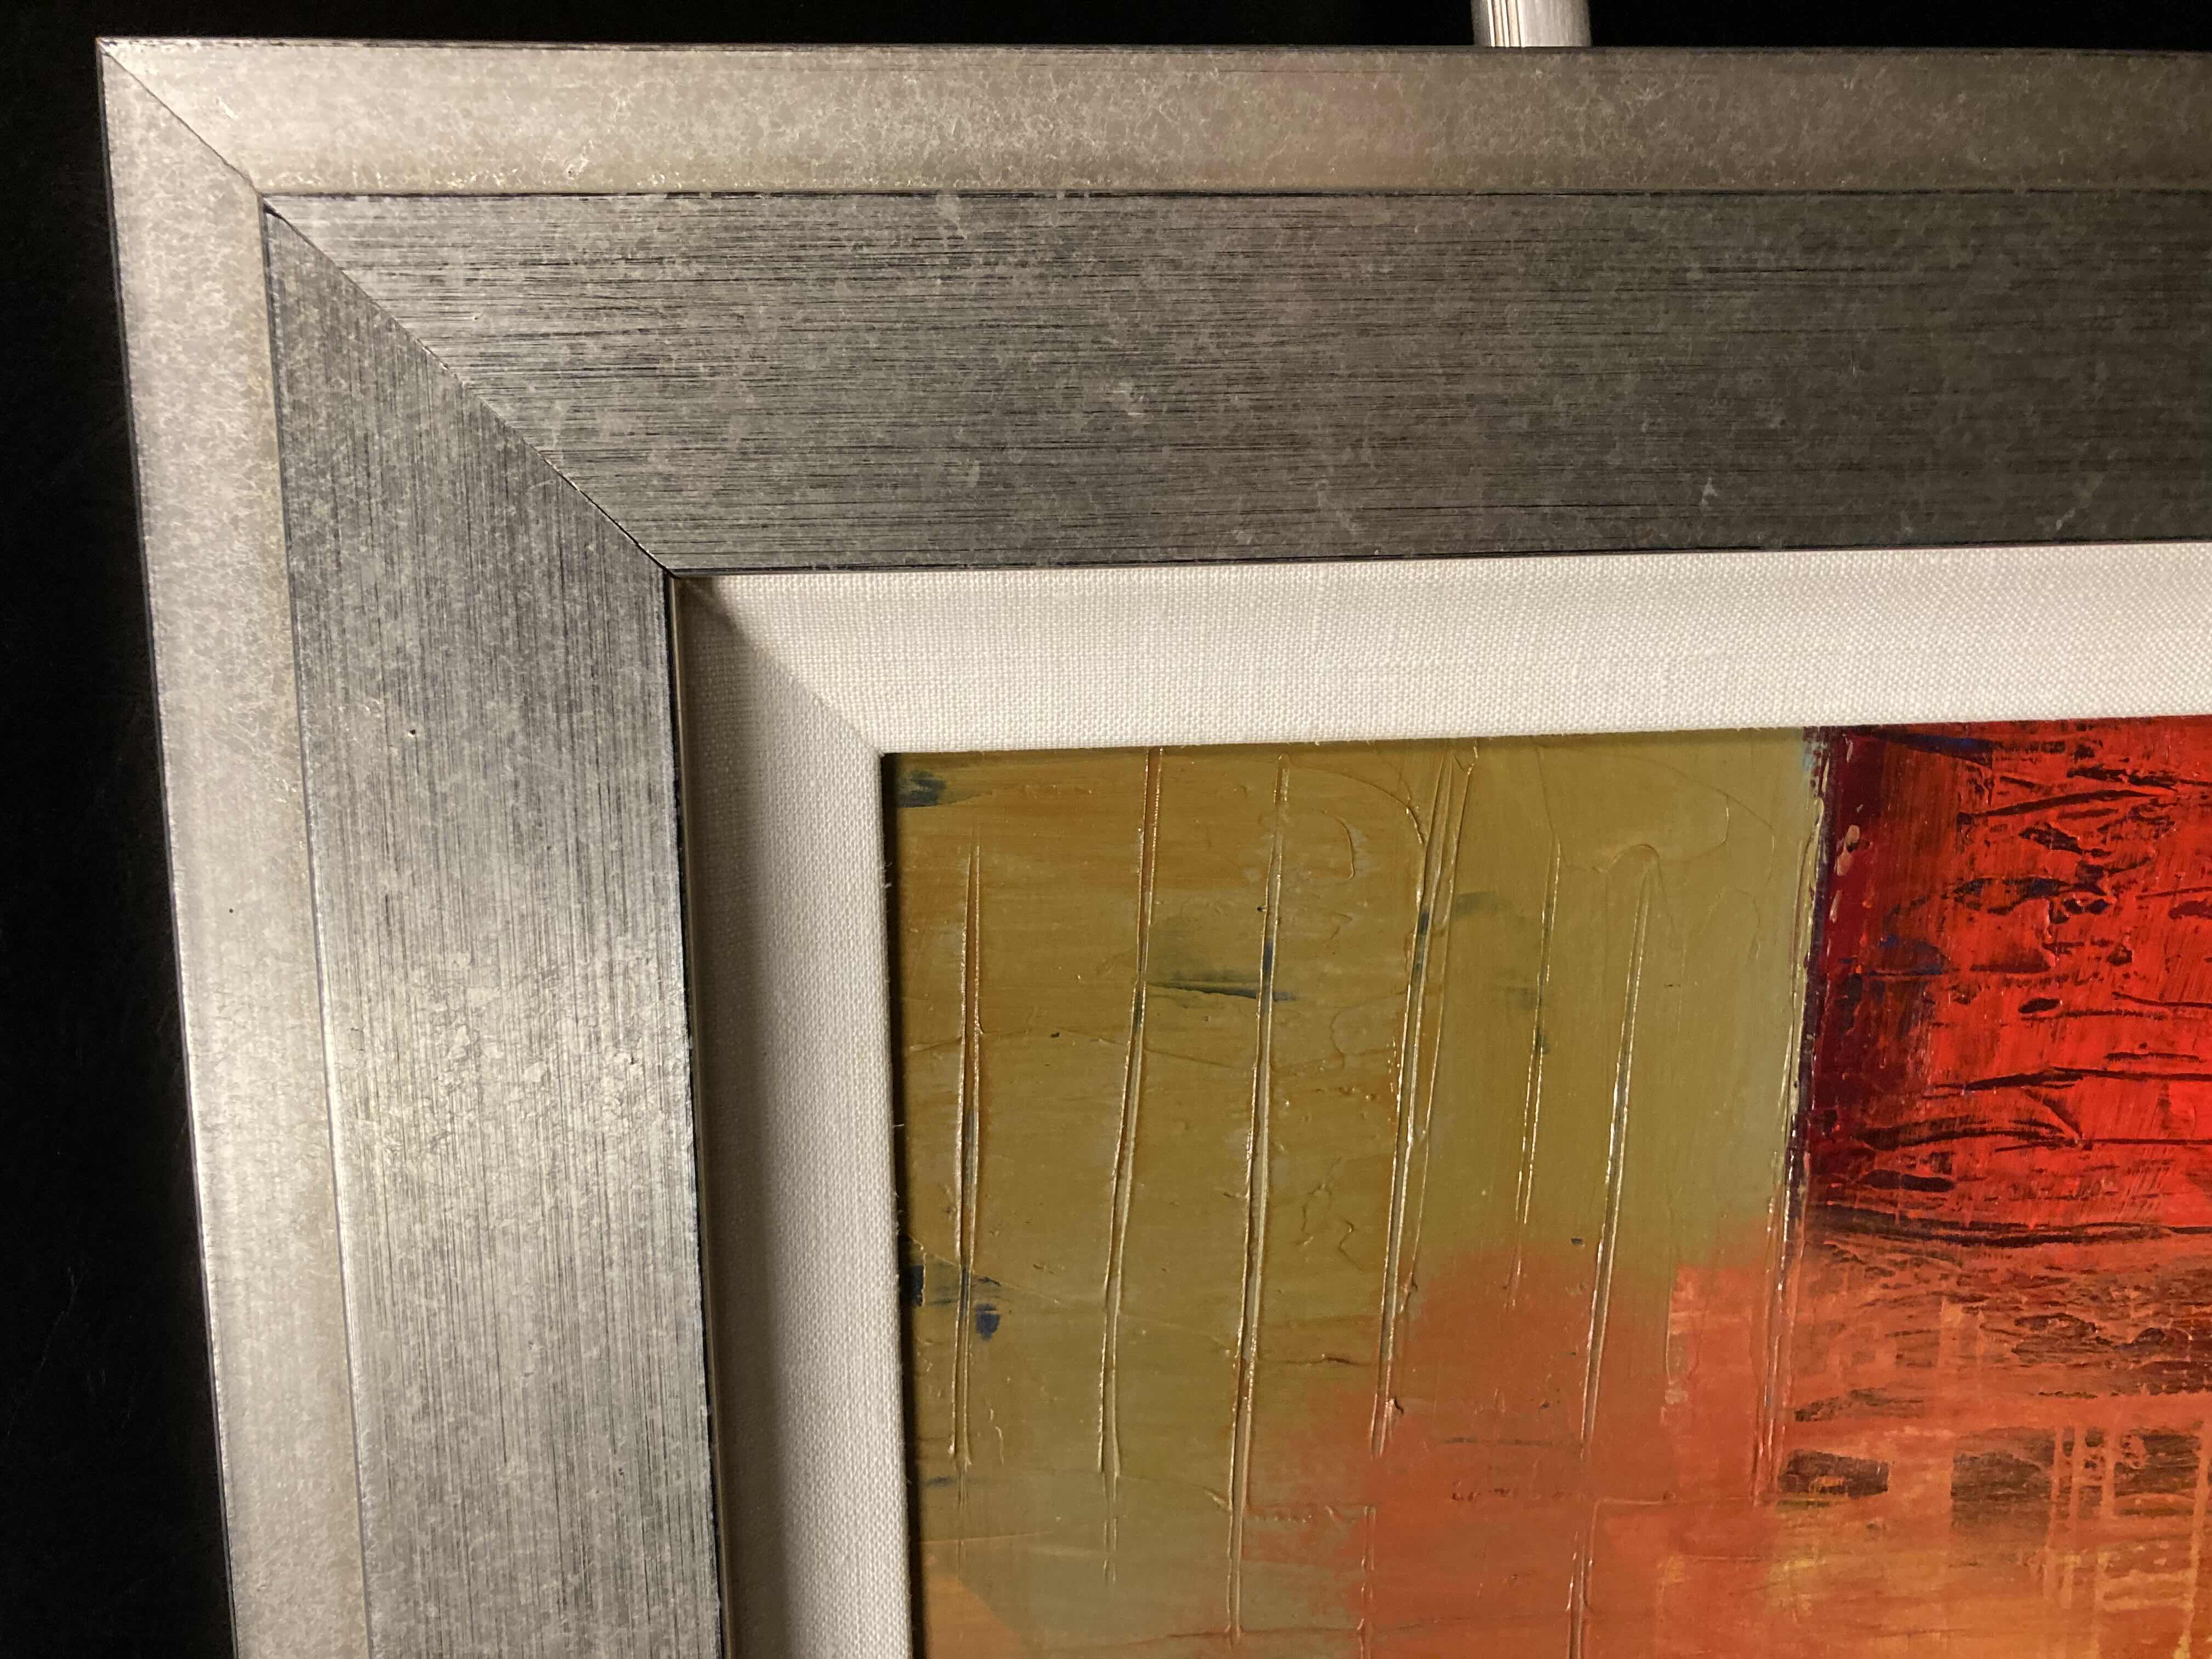 Photo 4 of ABSTRACT ART FRAMED CANVAS ARTWORK SIGNED BY ARTIST 37” X 27”